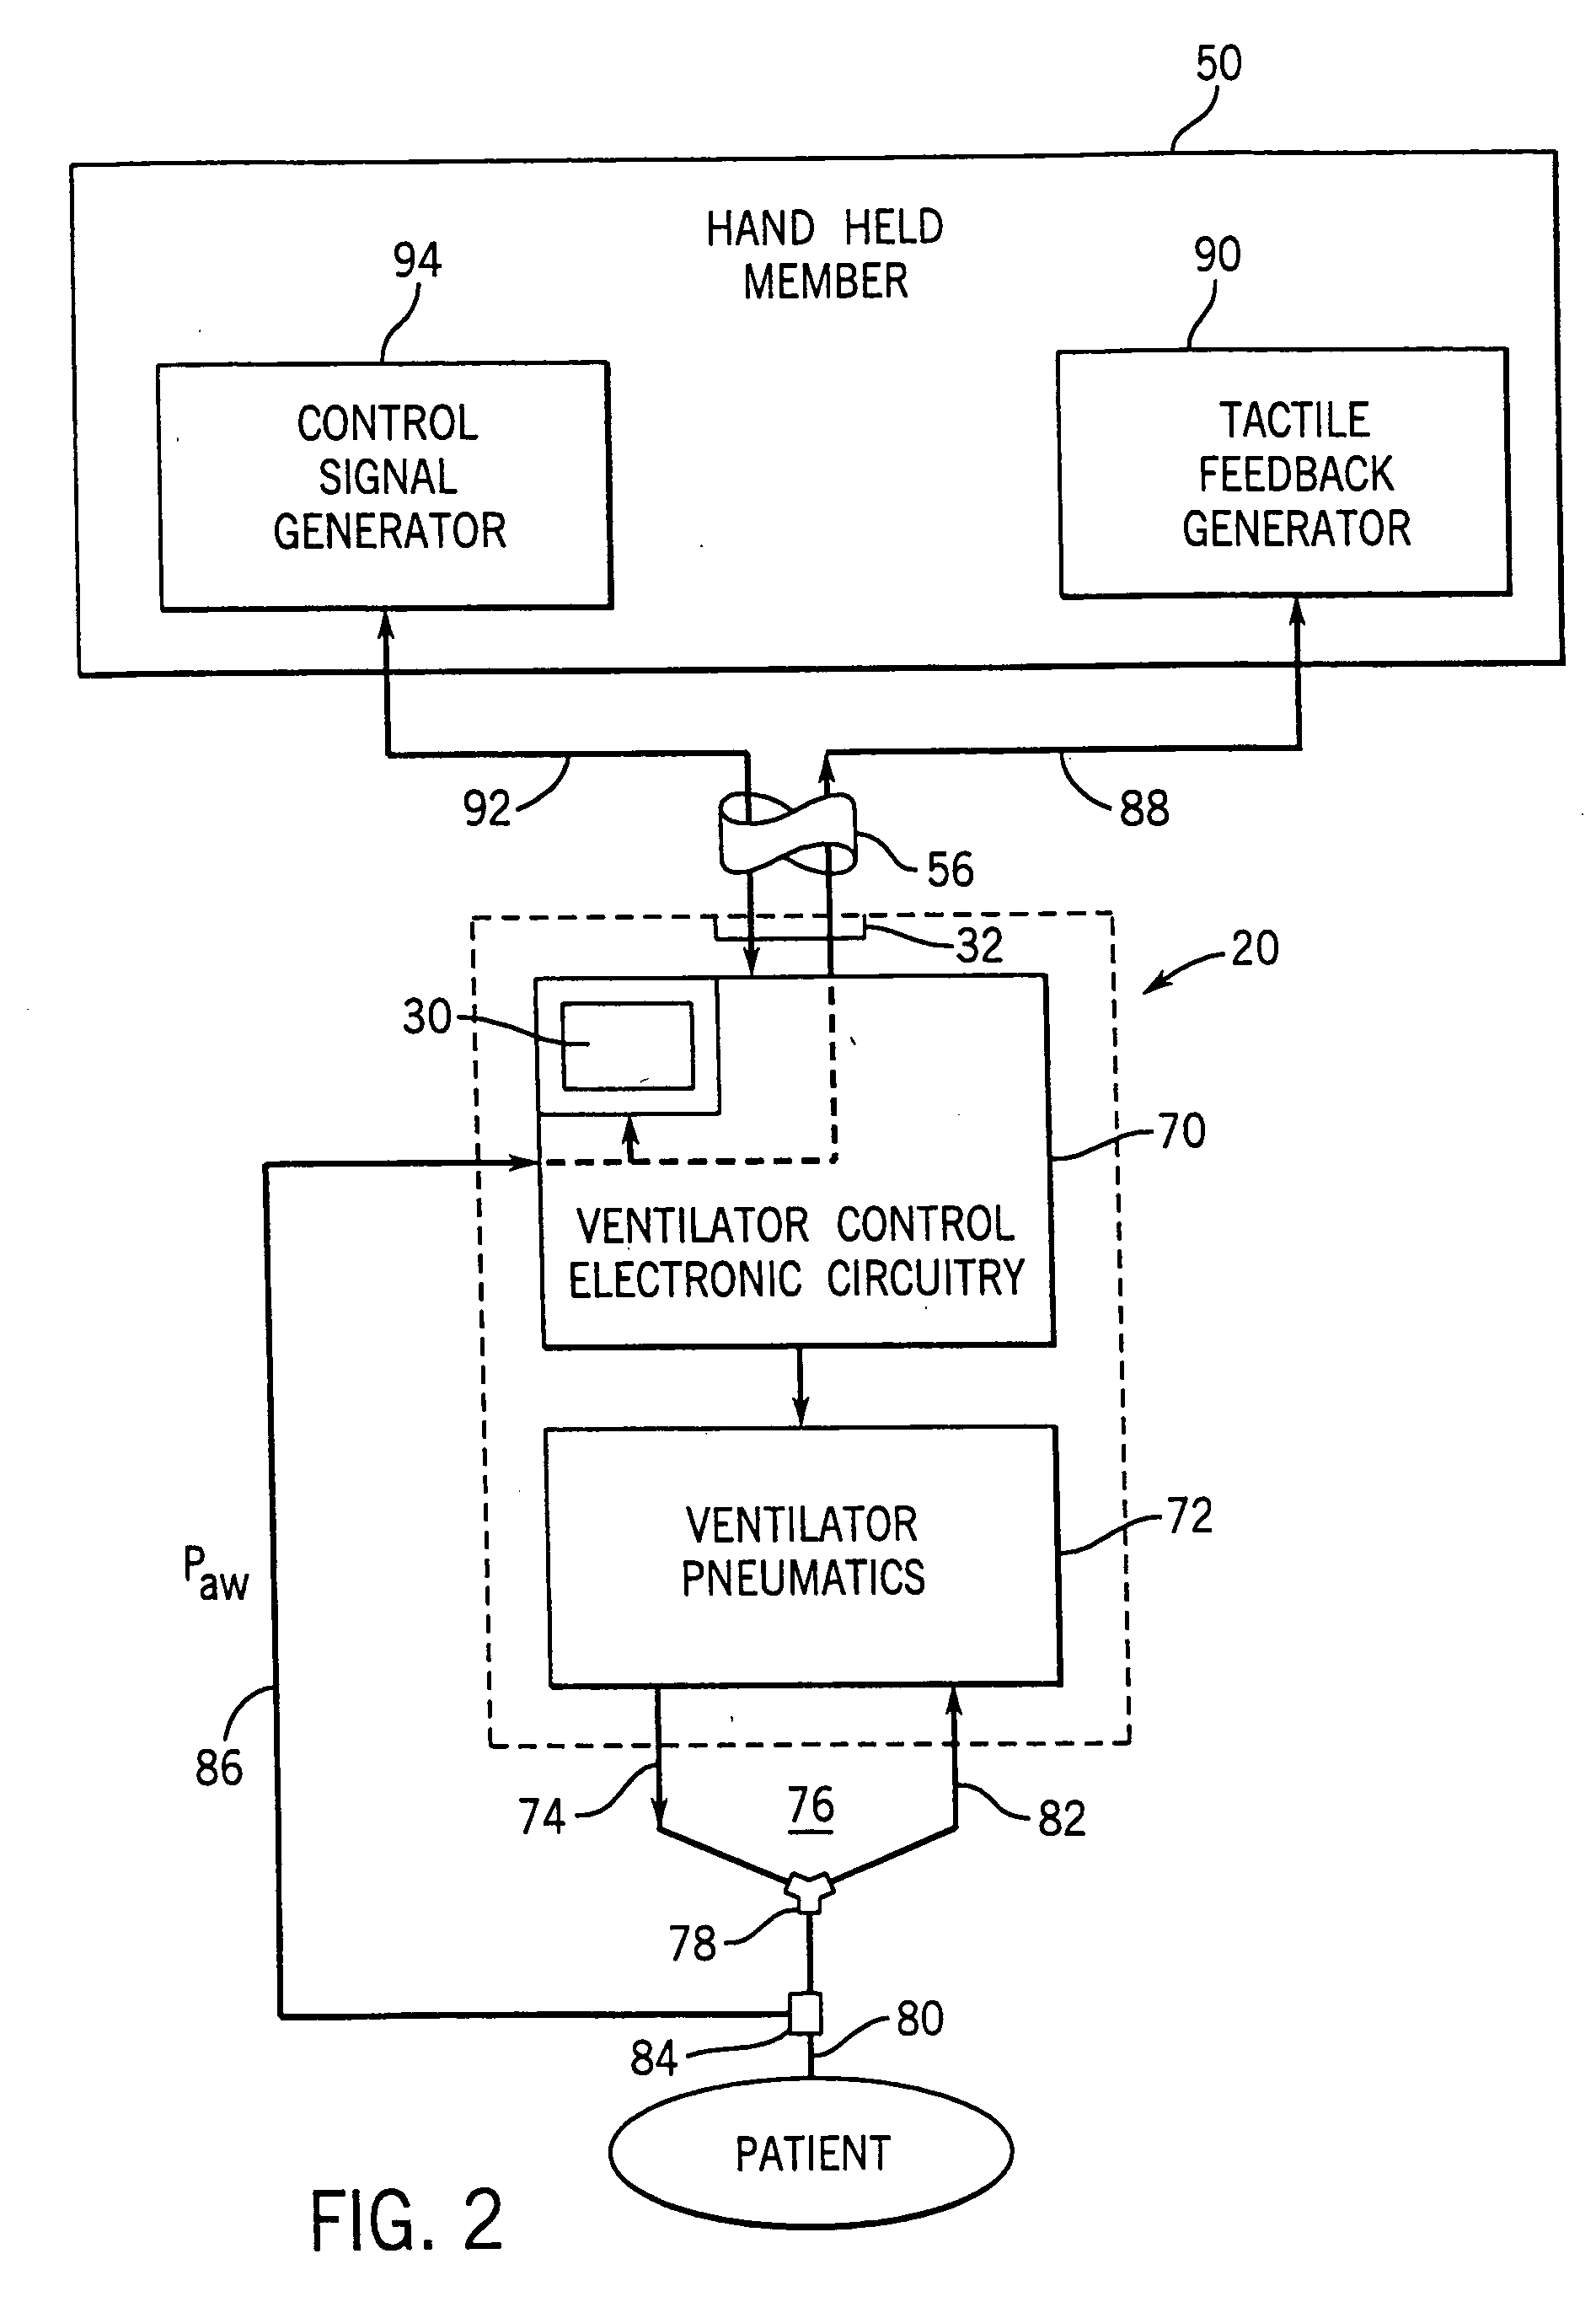 Remote control and tactile feedback system and method for medical apparatus